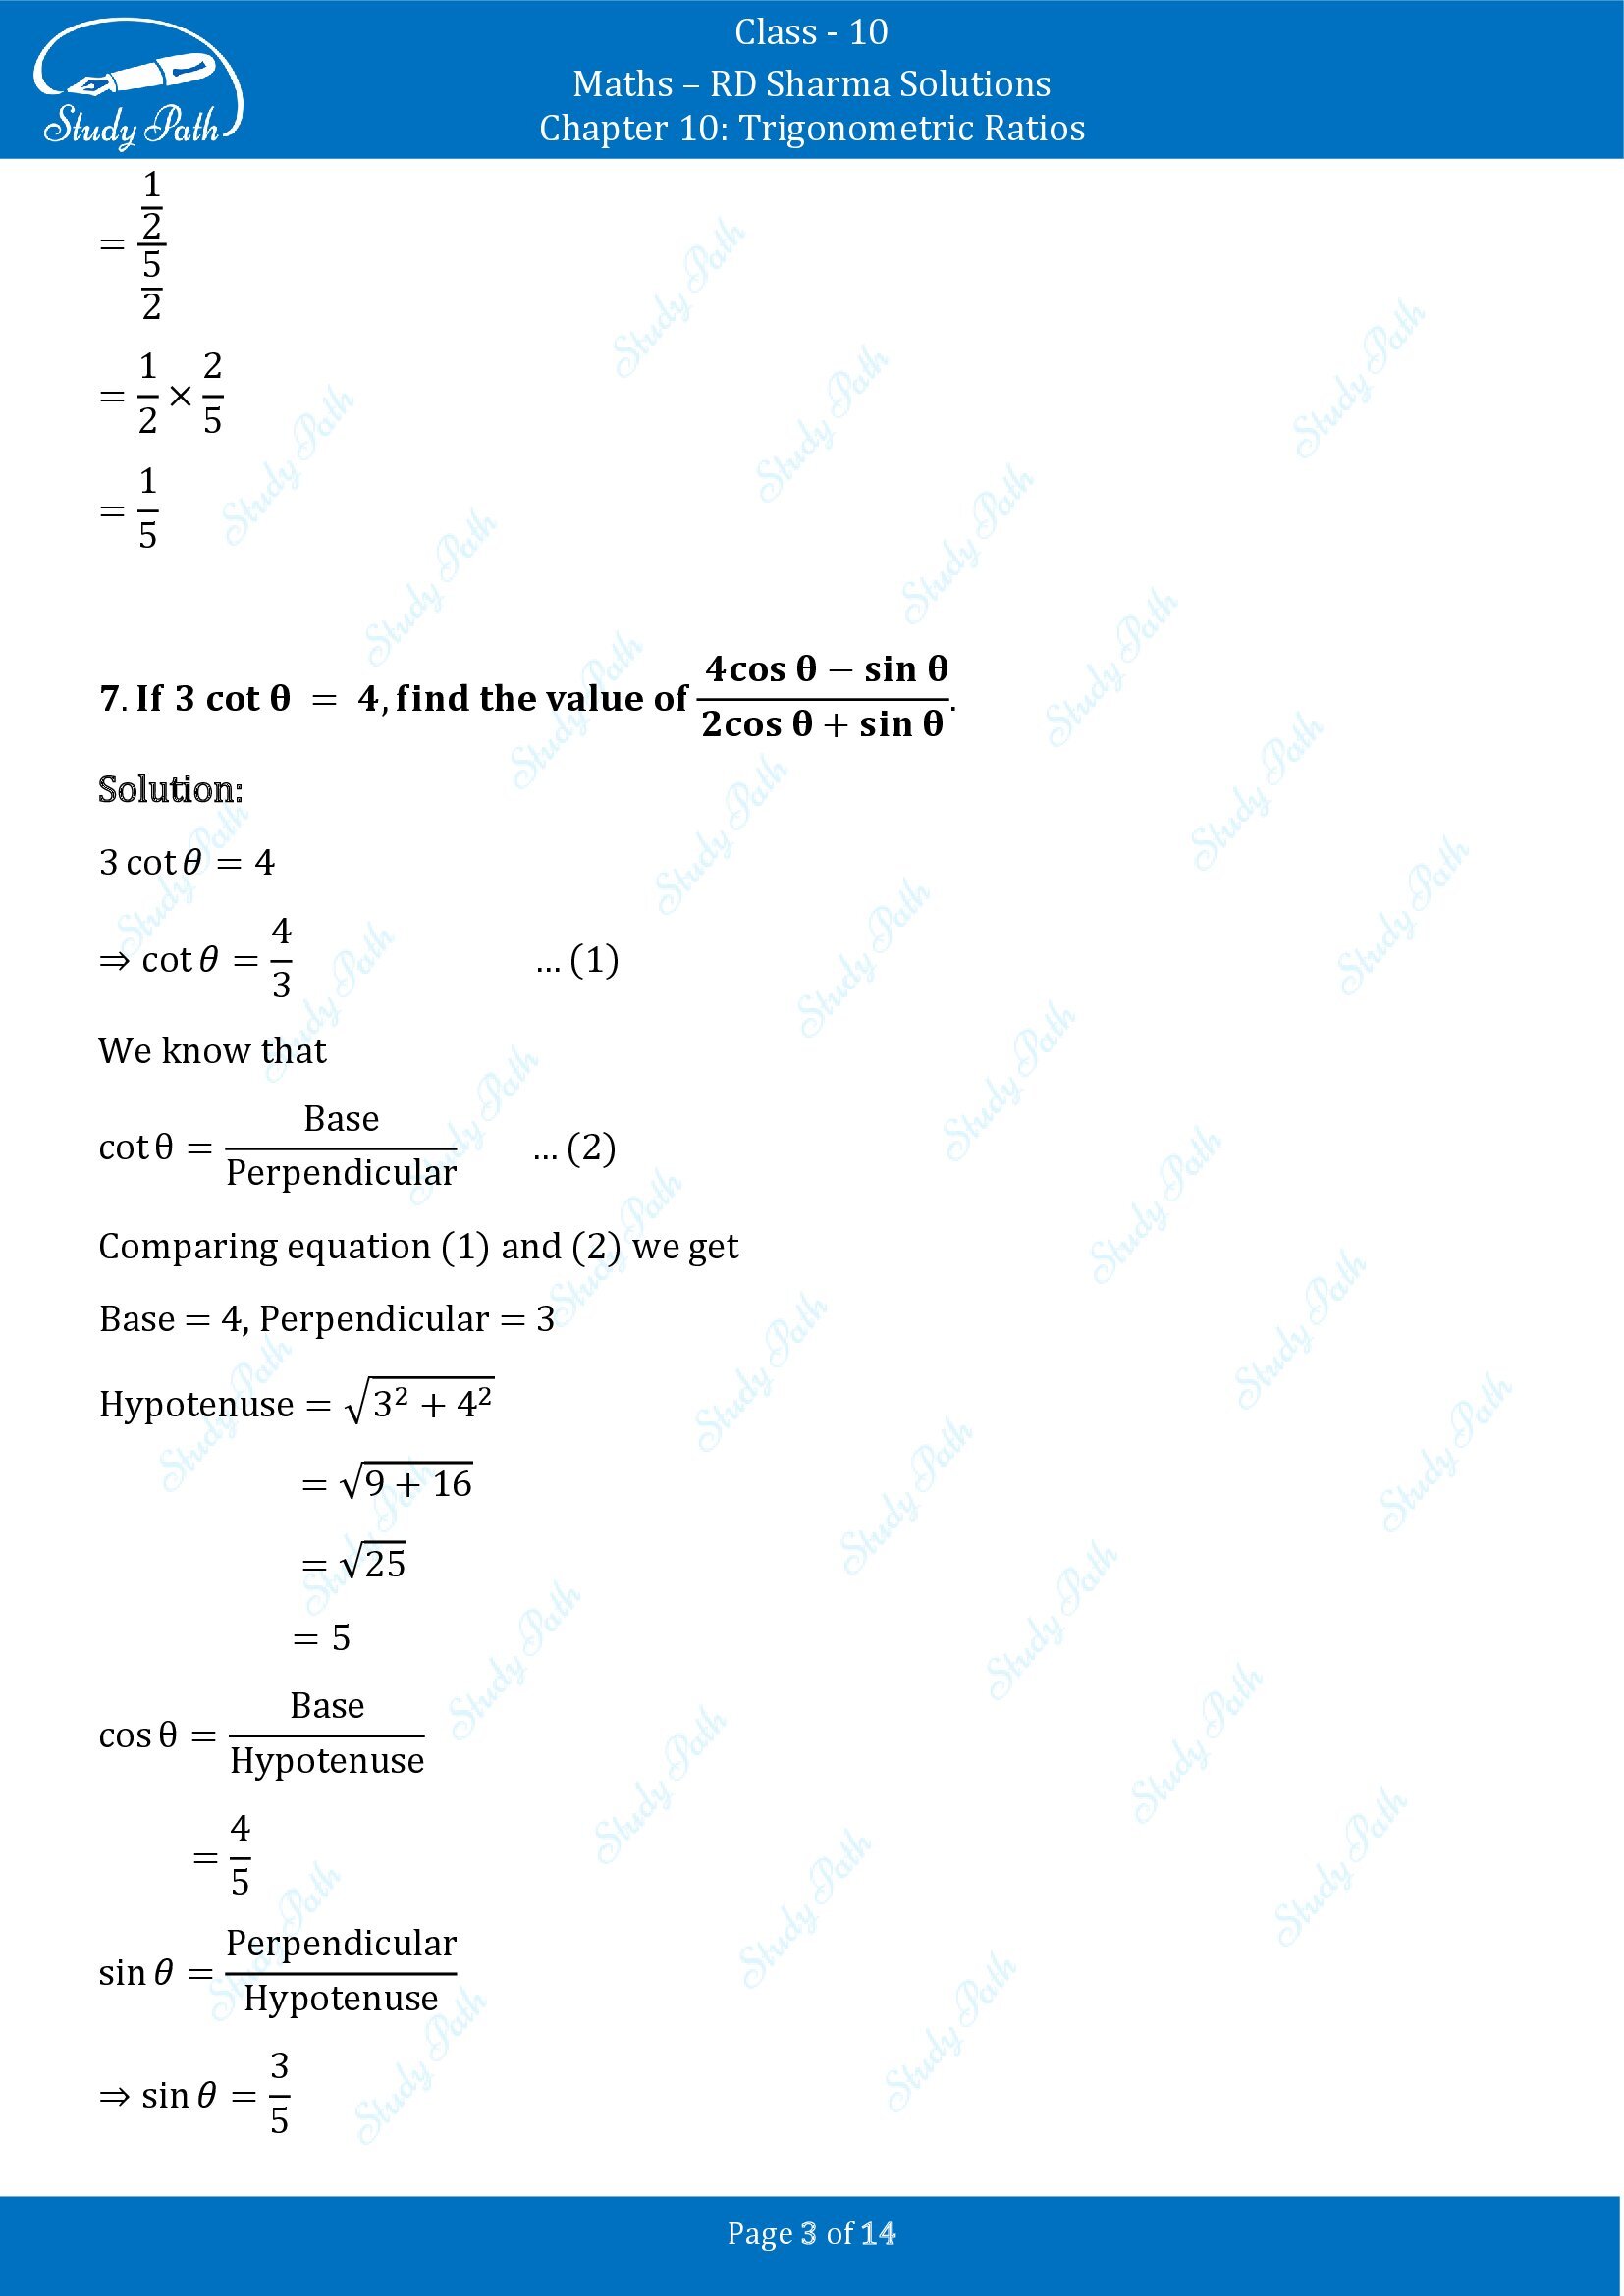 RD Sharma Solutions Class 10 Chapter 10 Trigonometric Ratios Very Short Answer Type Questions VSAQs 00003